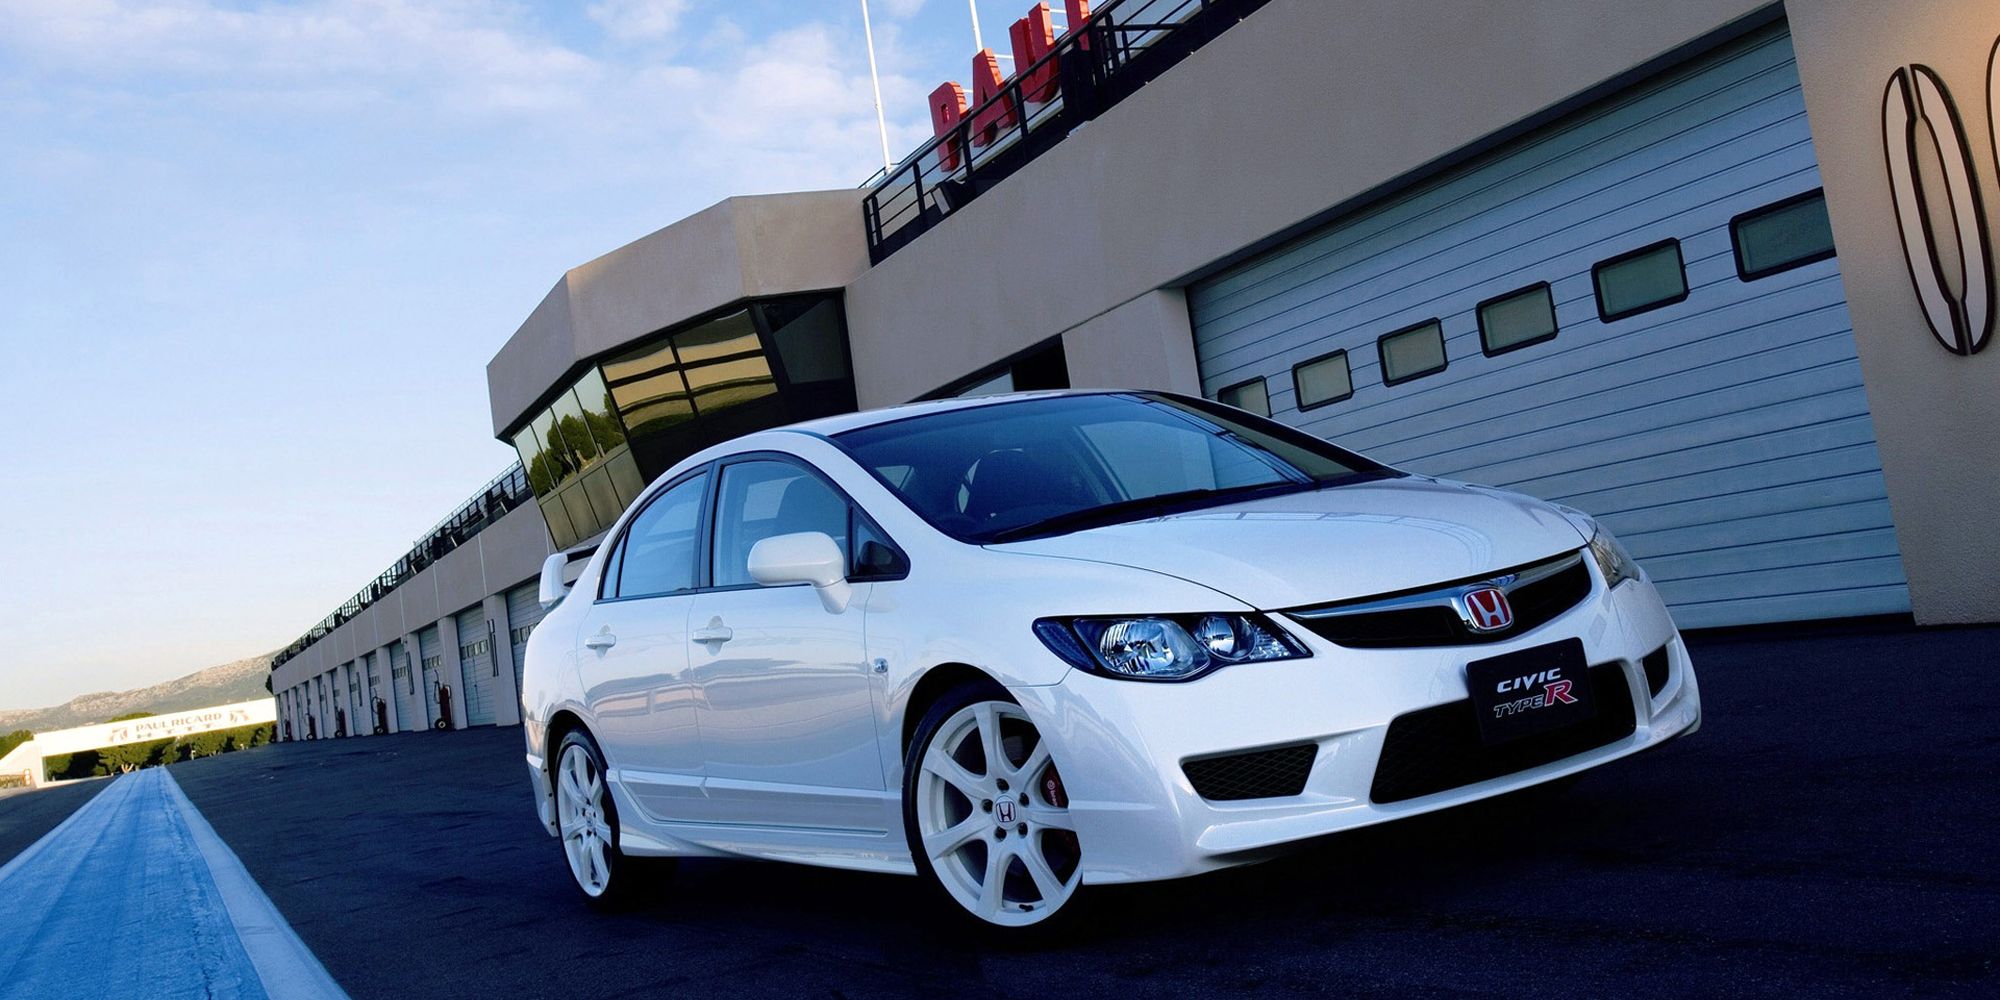 The front of the FD2 Type R